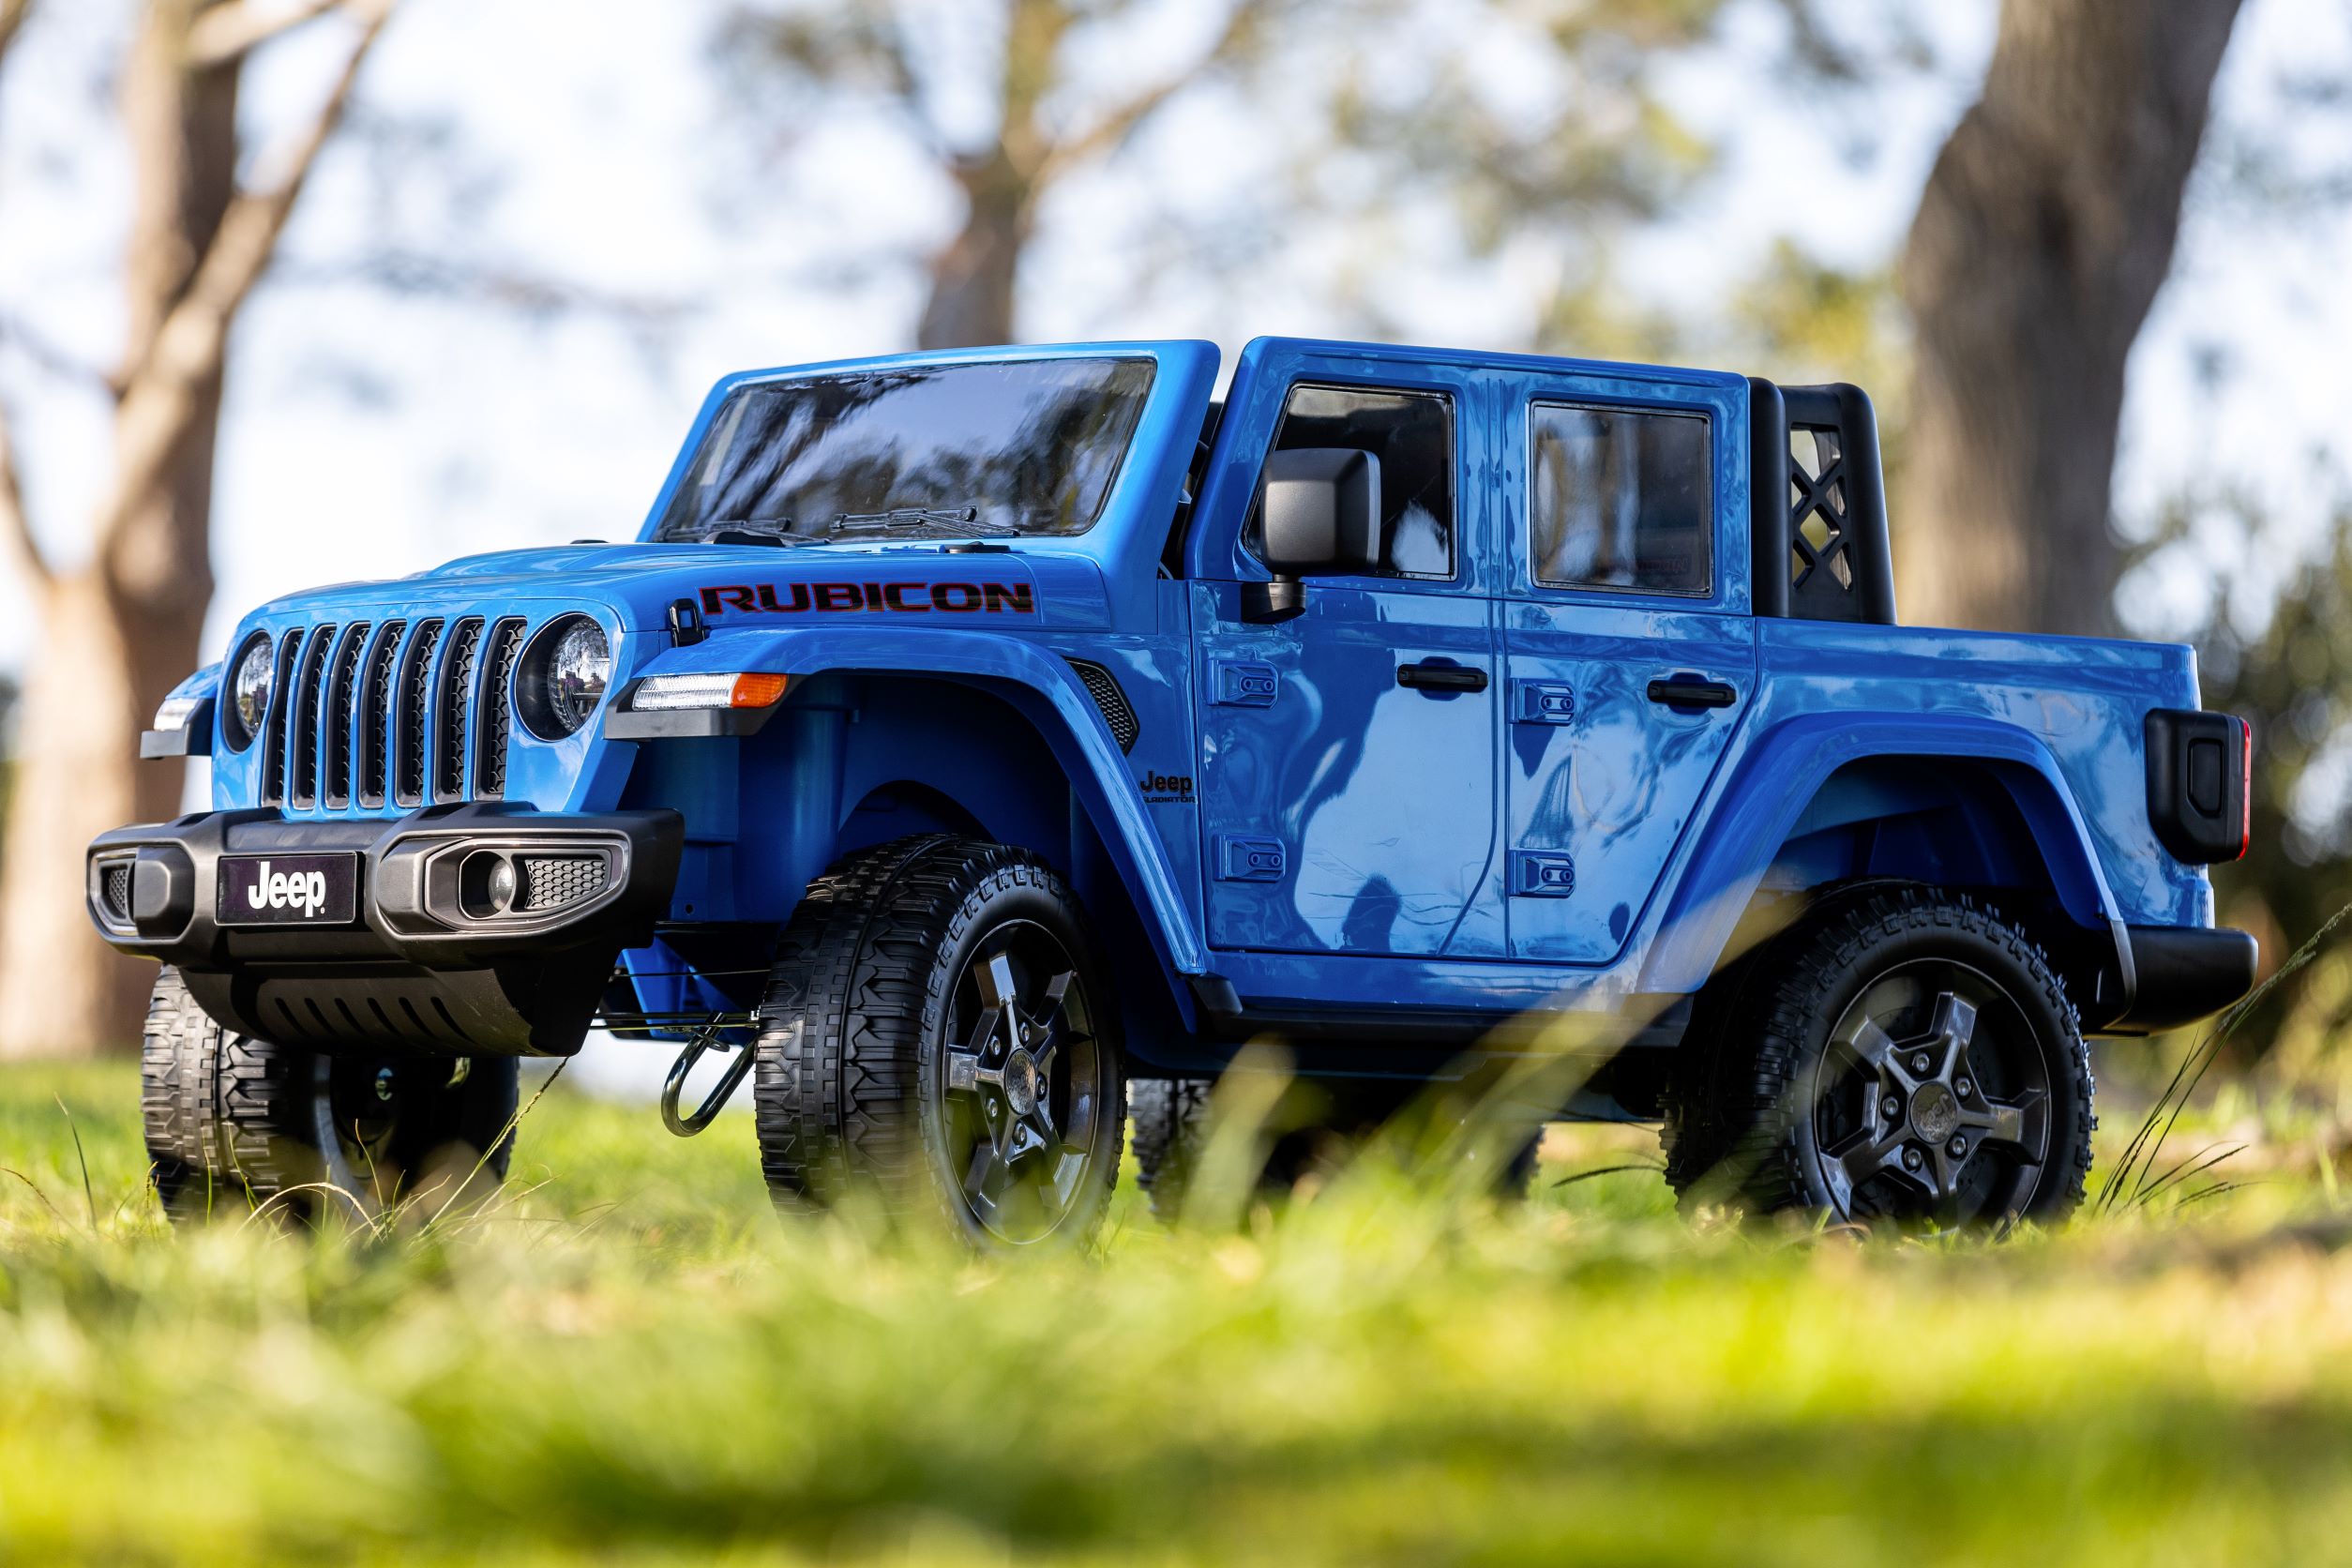 12V Jeep Gladiator Rubicon Battery Powered Ride-on by Hyper Toys, 2-Seater, Blue, for a Child Ages 3-8, Max Speed 5 mph - image 5 of 18